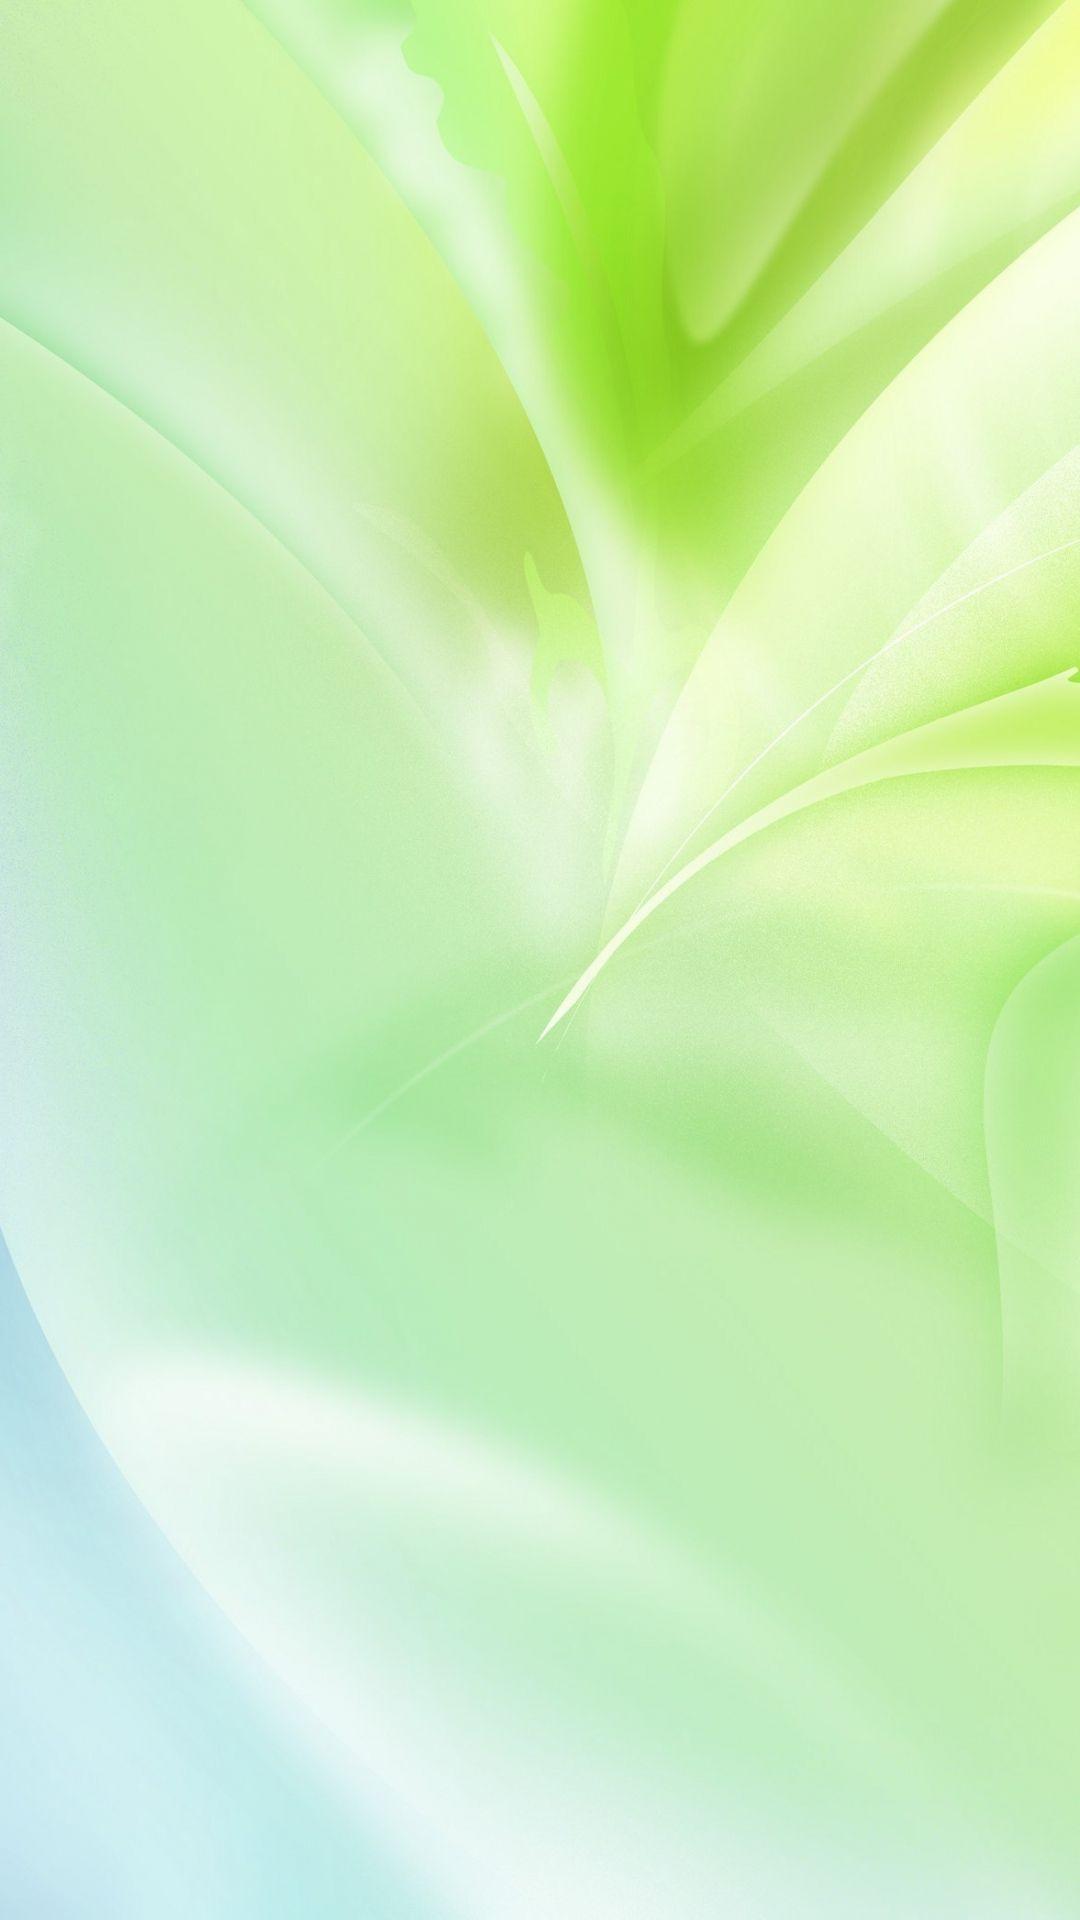 Line Light Green White iPhone 6 wallpaper. Colors